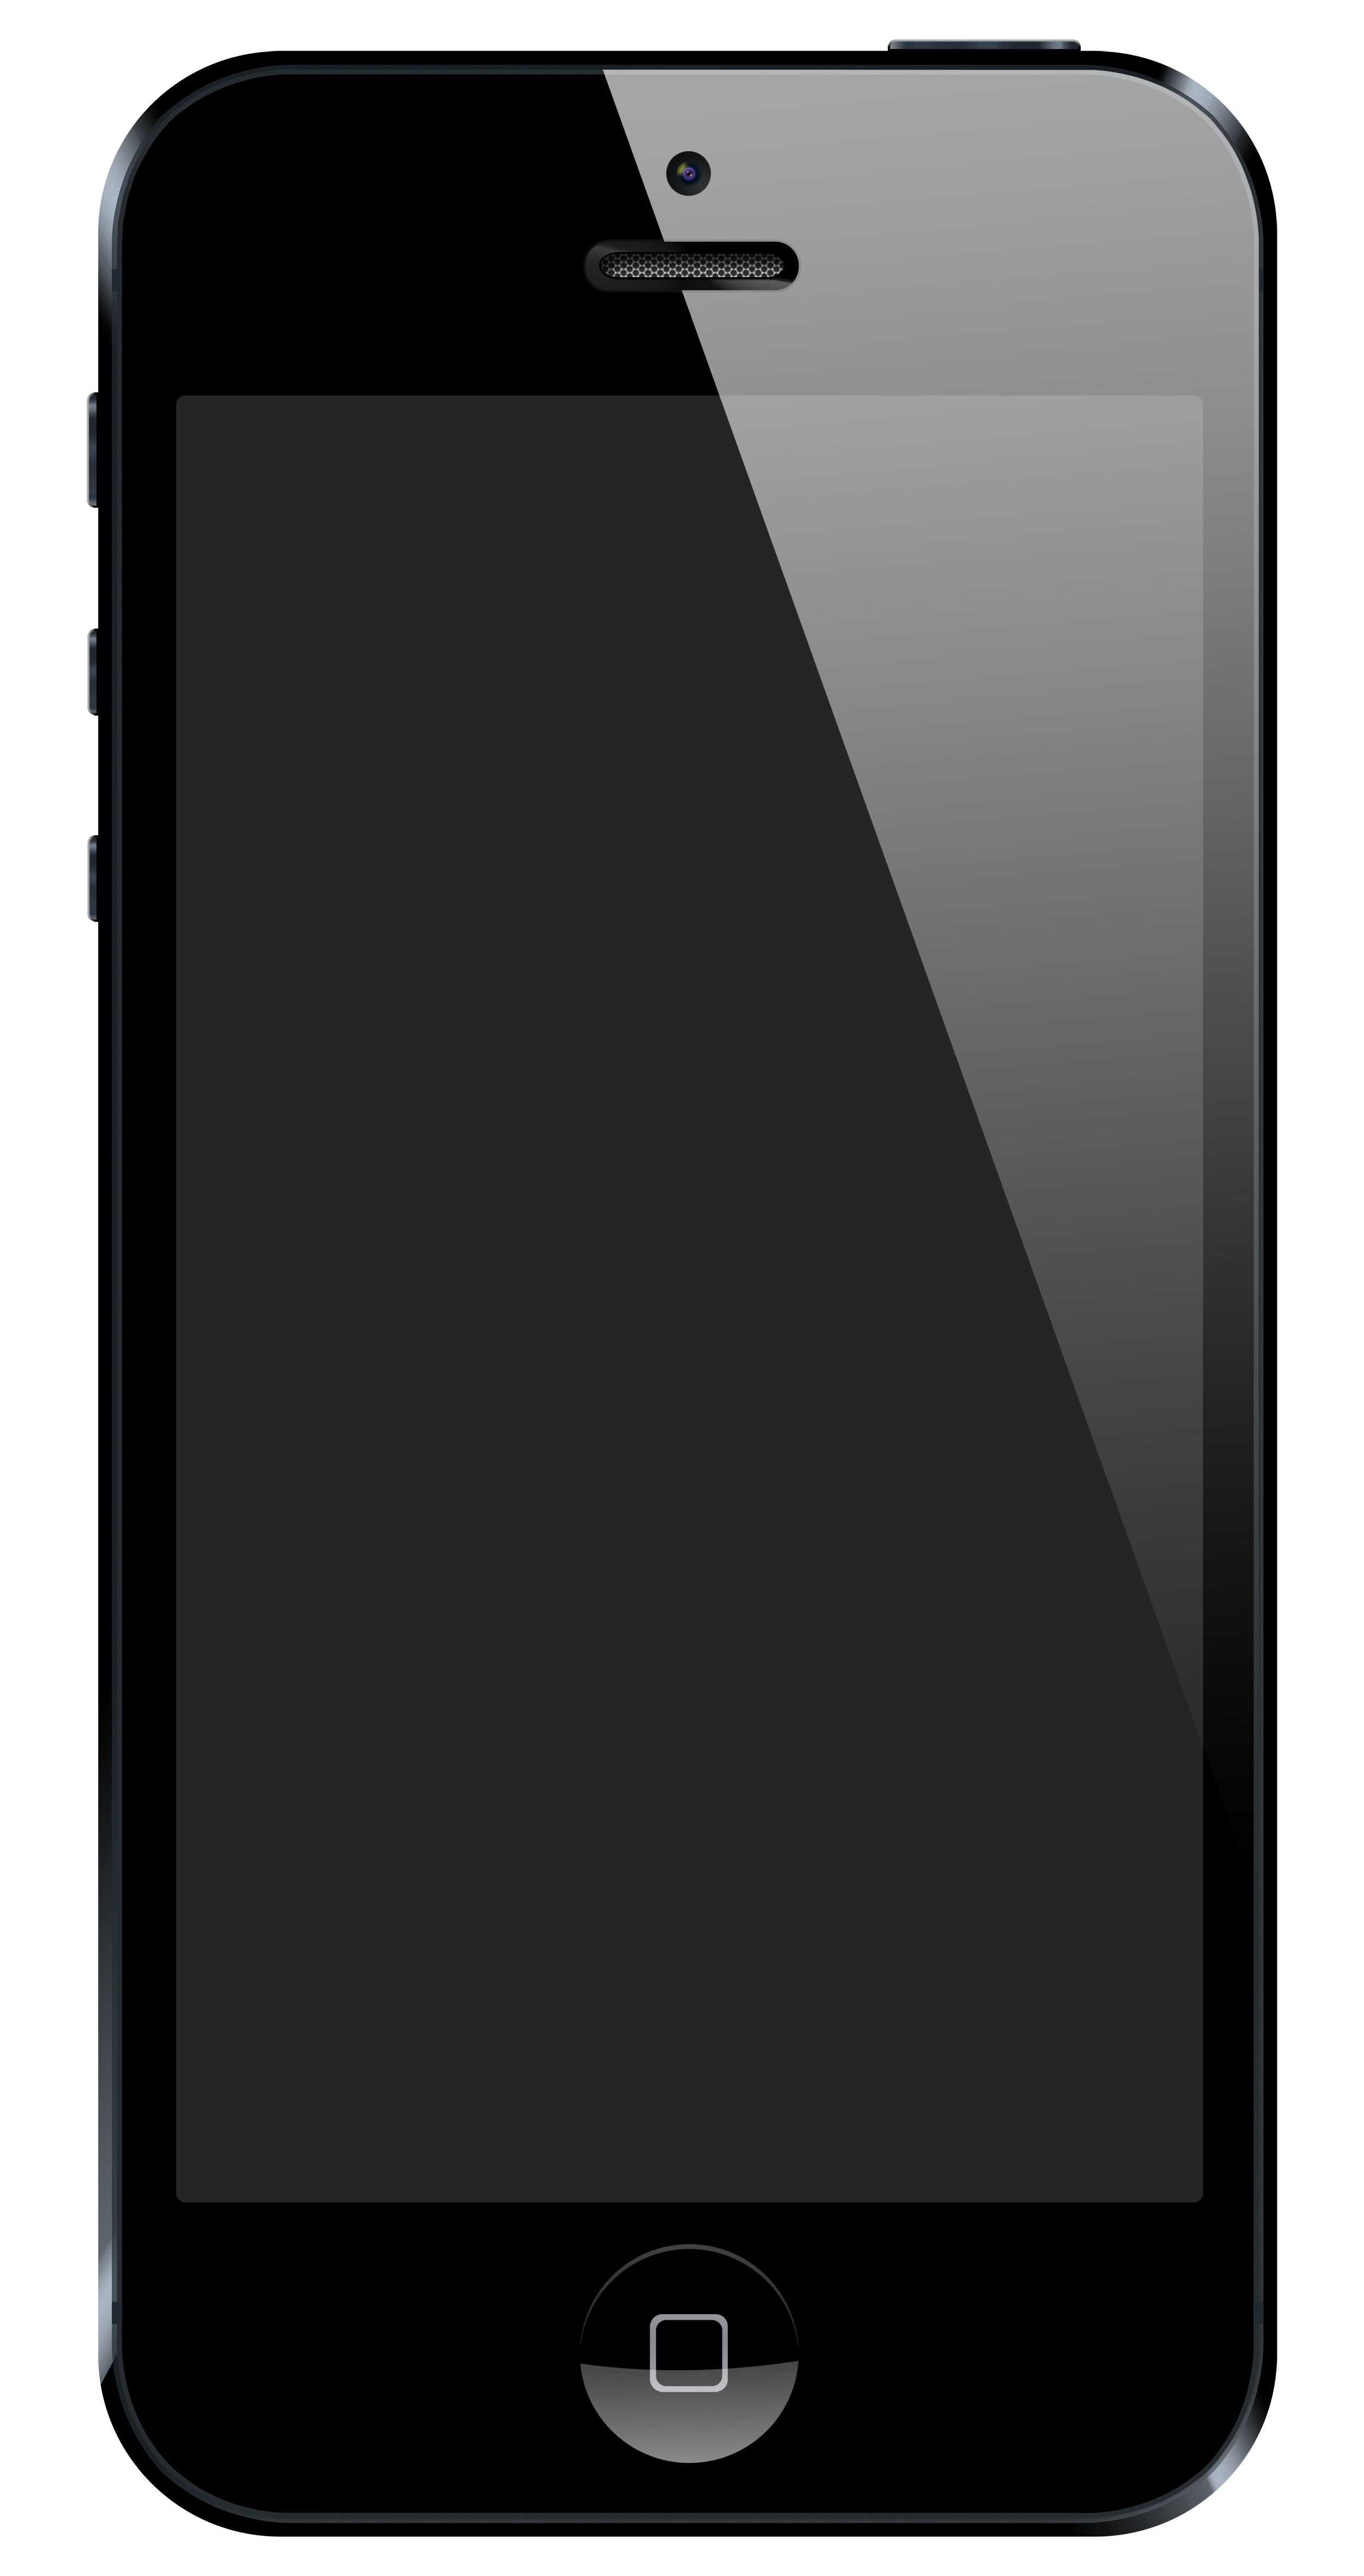 Iphone PNG - 11941